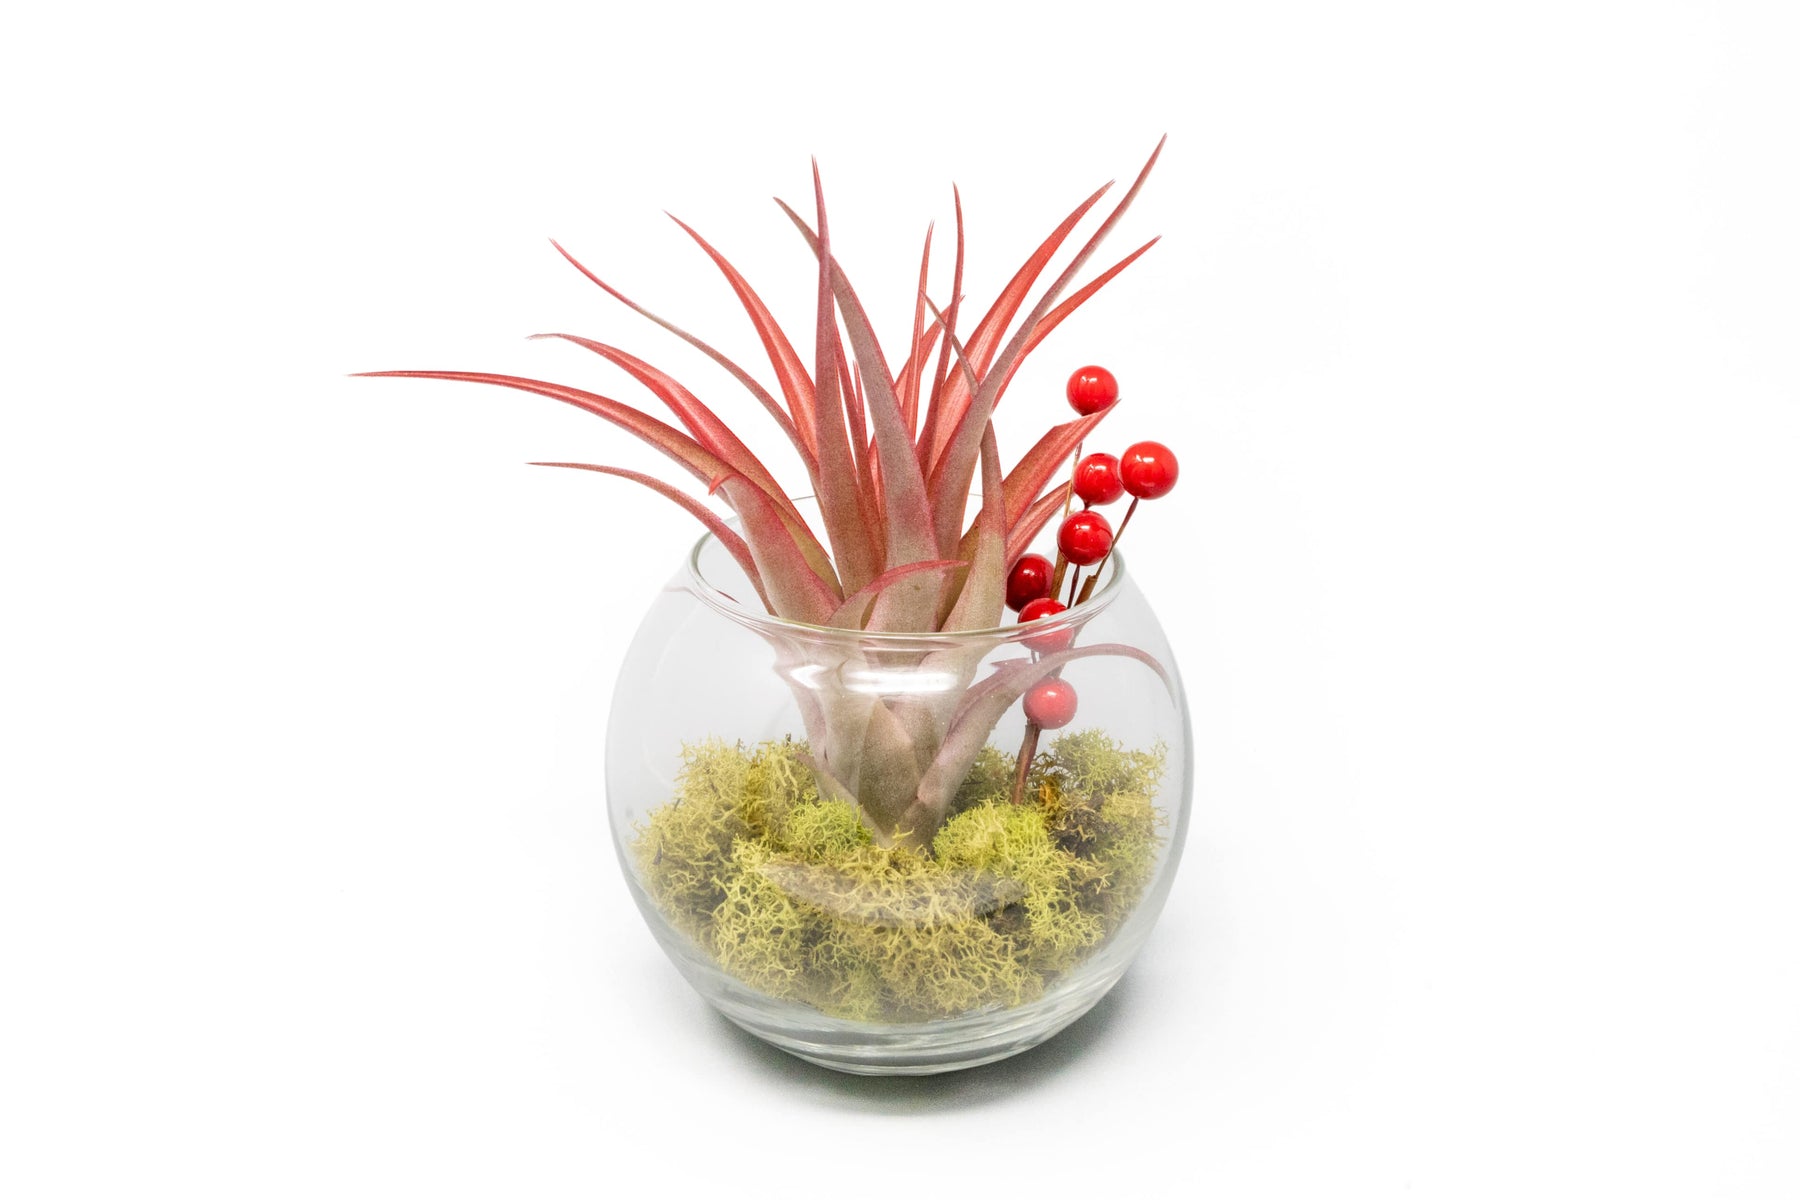  4.5 Inch Glass Air Plant Terrarium Kit with Color Changing LED  Light Display, Live Tillandsia Air Plant, White Sand, Seashell and Colored  Reindeer Moss (Green) : Patio, Lawn & Garden